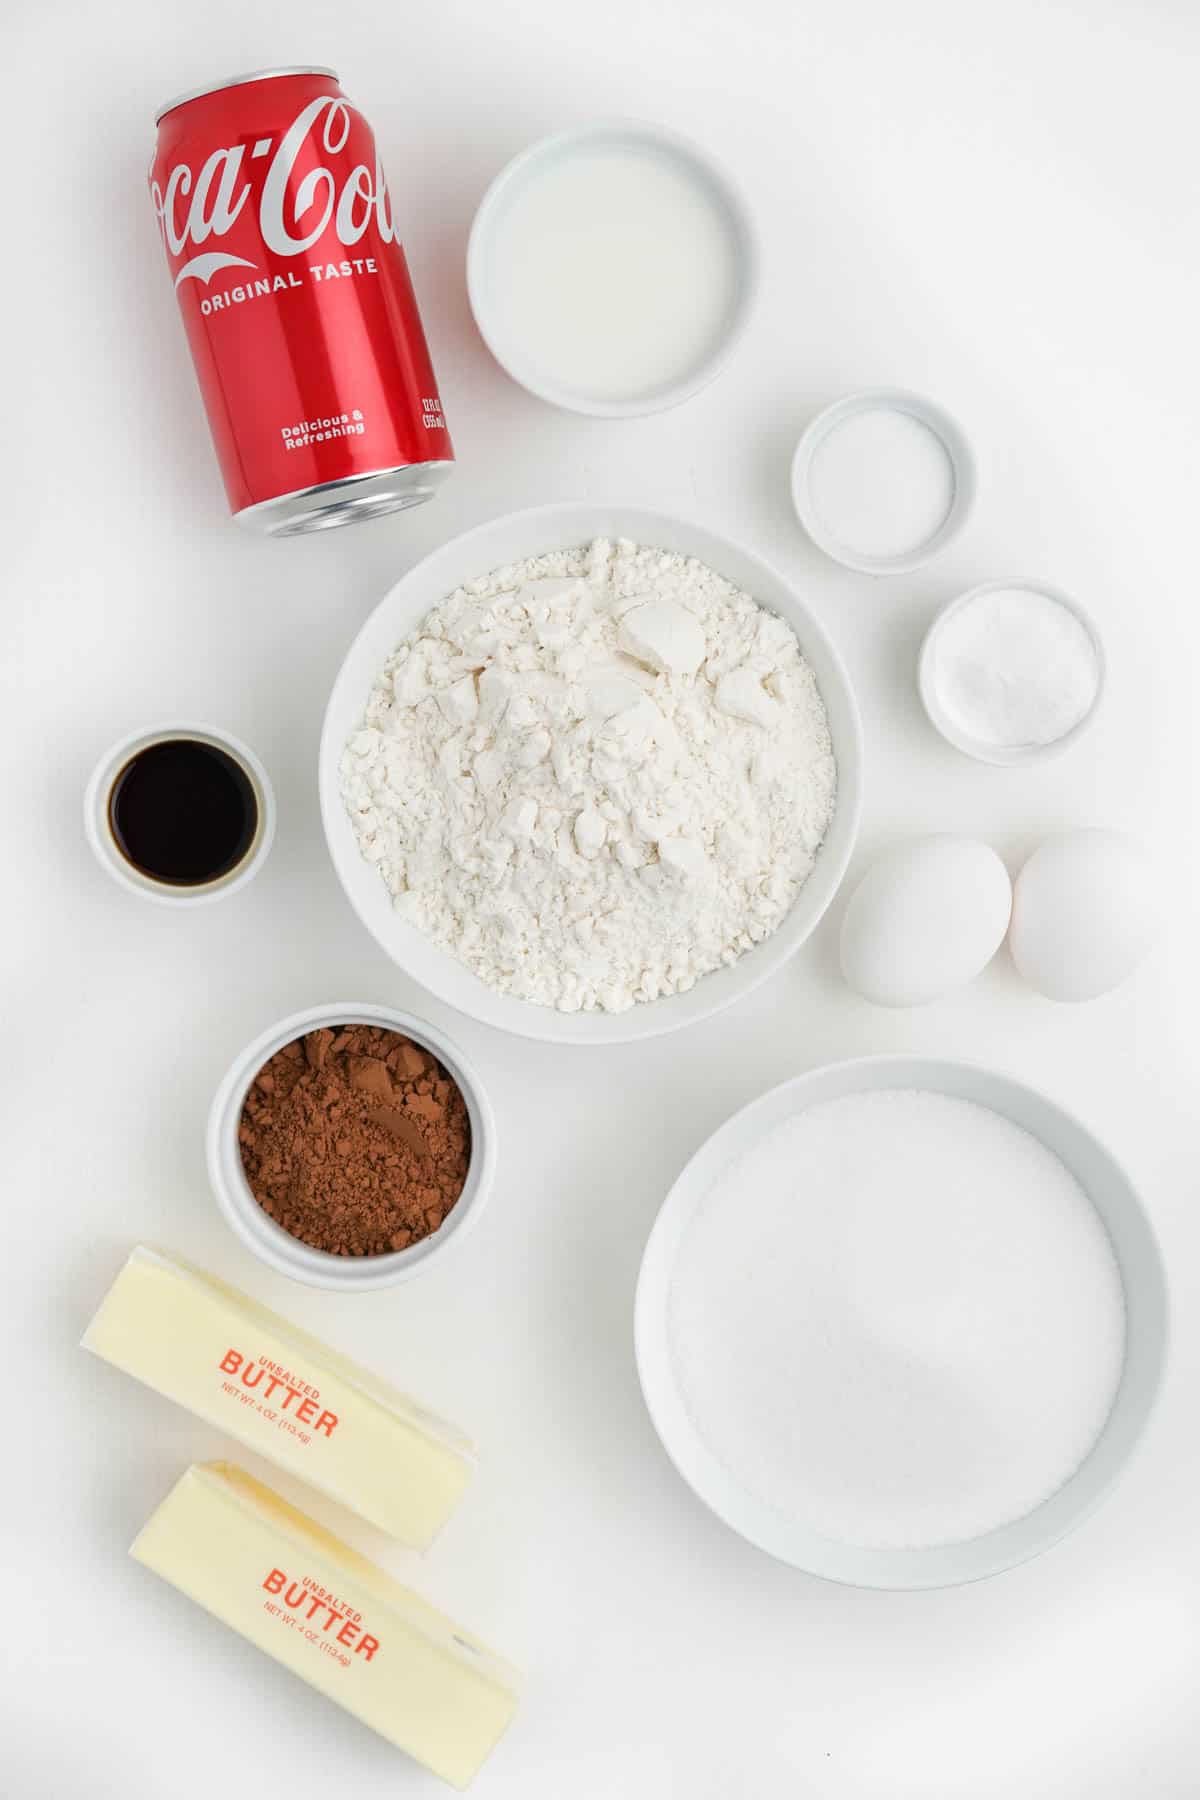 Ingredients for coca cola cake.